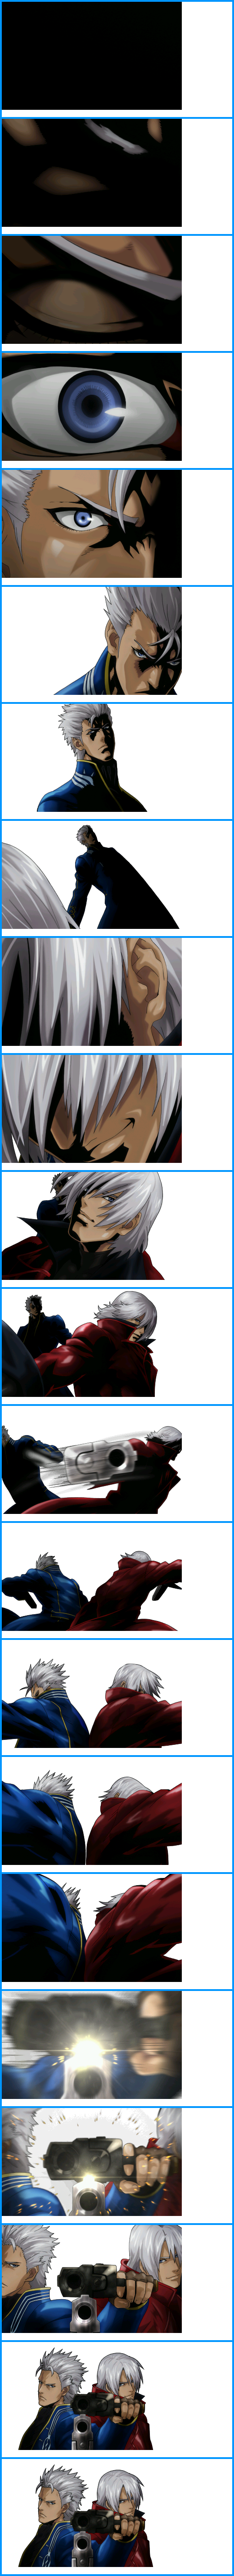 Project X Zone 2 - Dante and Vergil